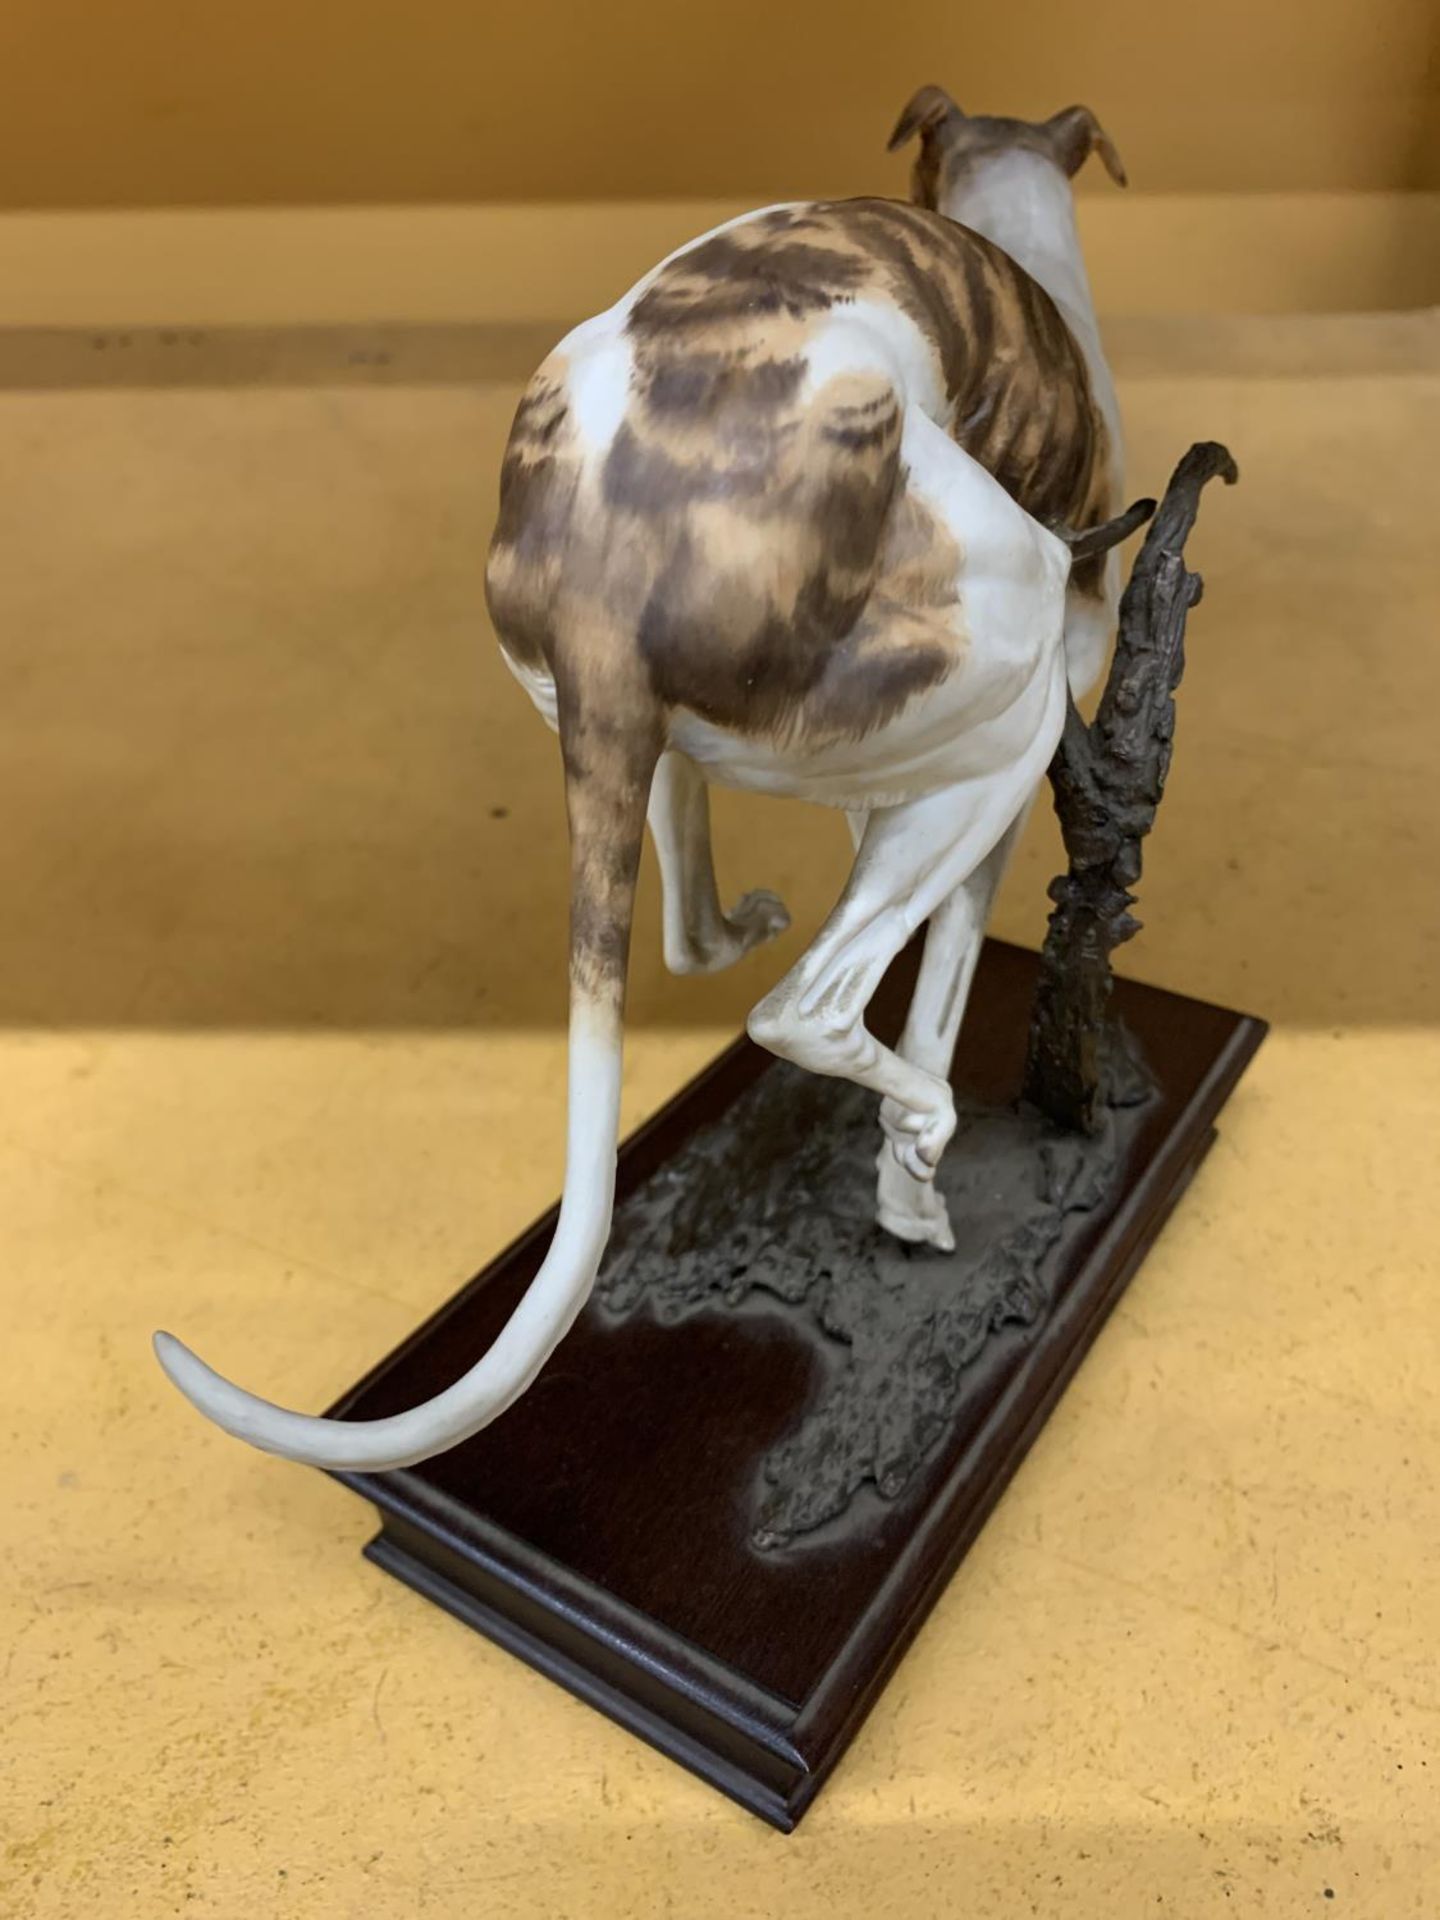 AN ALBANY FINE CHINA MODEL OF A GREYHOUND BY NEIL CAMPBELL, LILMITED EDITION 98/250 WITH CERTIFICATE - Image 5 of 6